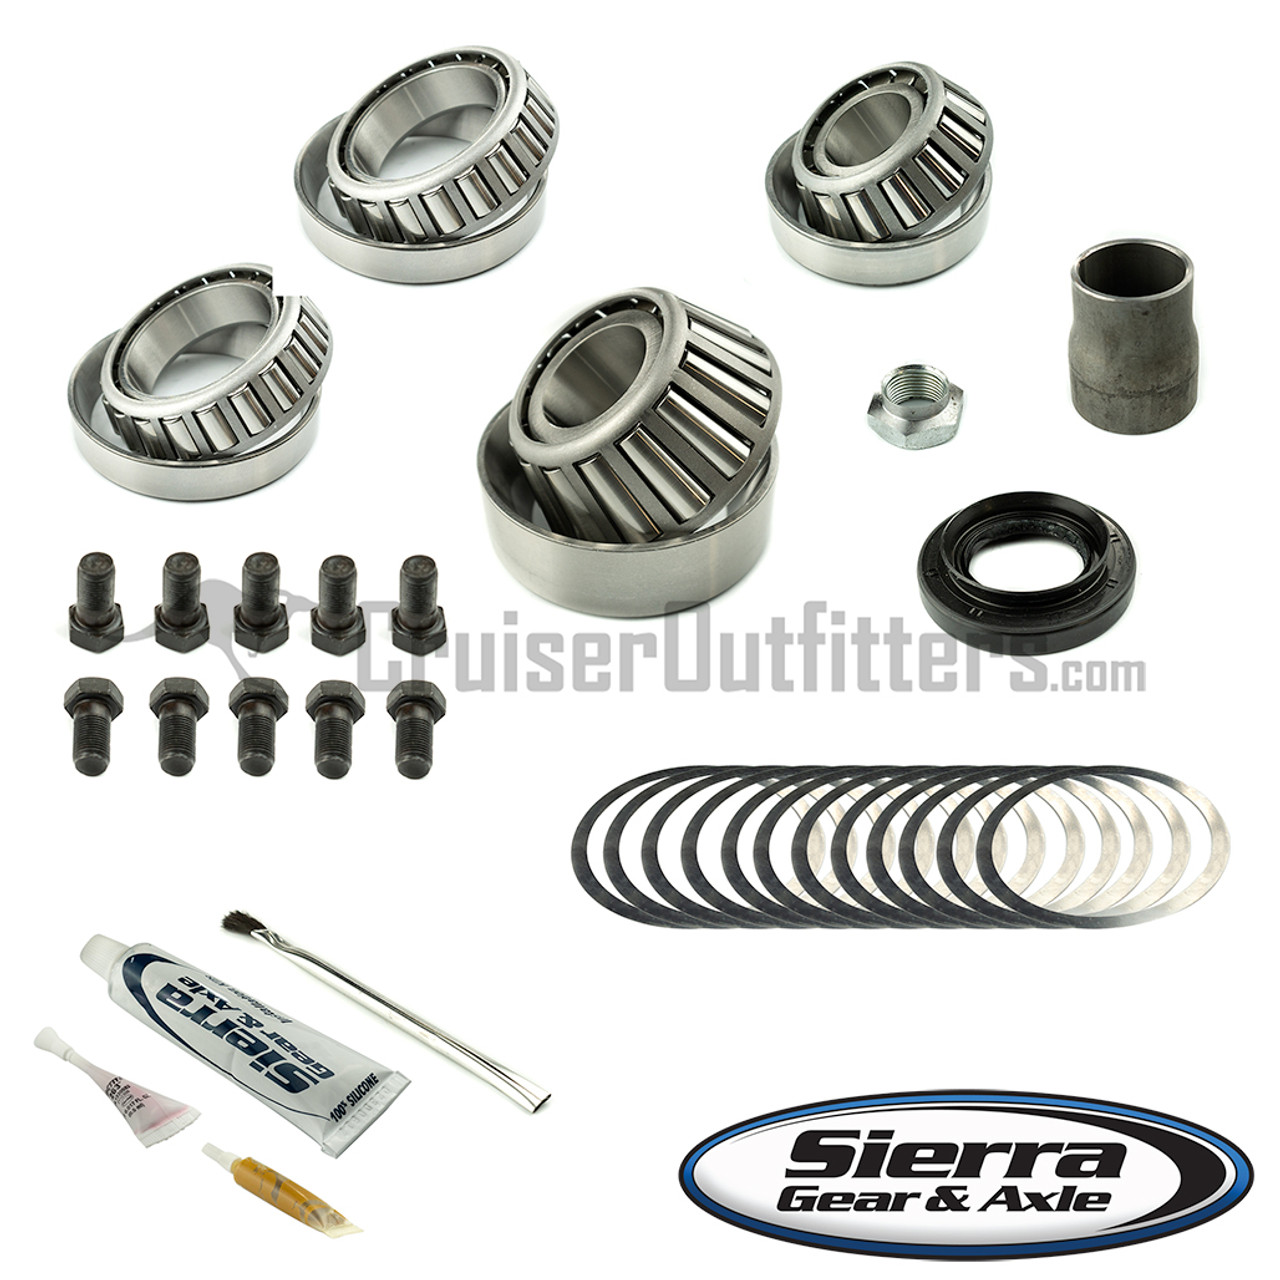 IKTOYLCF - Ring and Pinion Install / Differential Overhaul Kit - Fits 80/81 Series High Pinion Front - 27 Spline